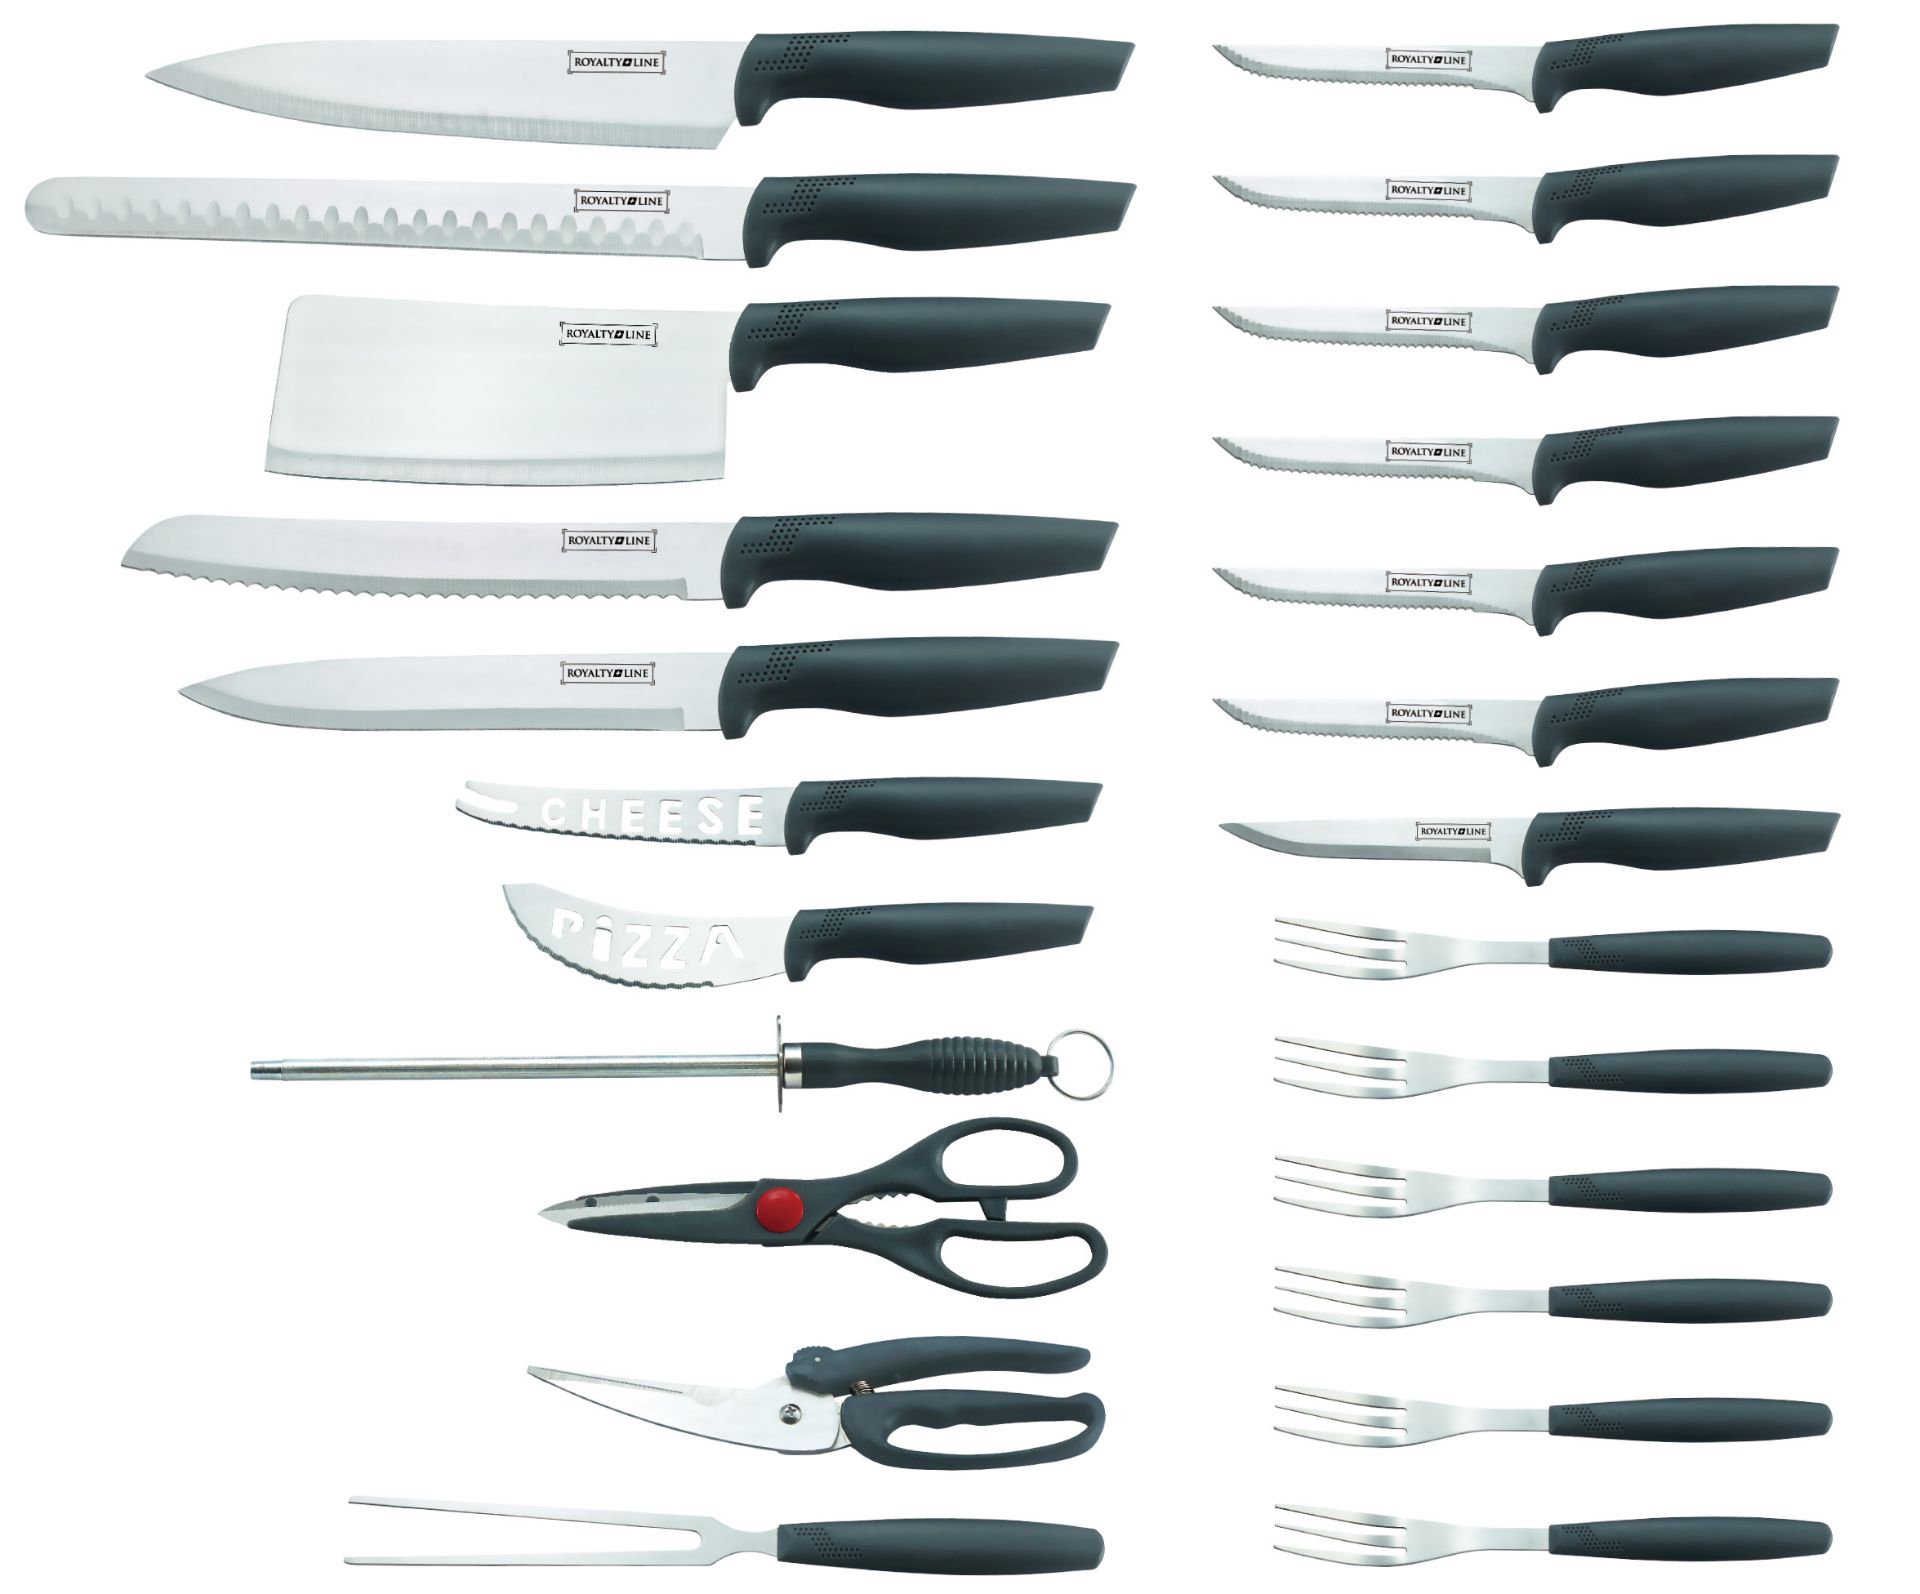 V Brand New 24 Piece Stainless Steel Knife Set - Includes 6 x Forks and 6 x Steak Knives - 1 x Pizza